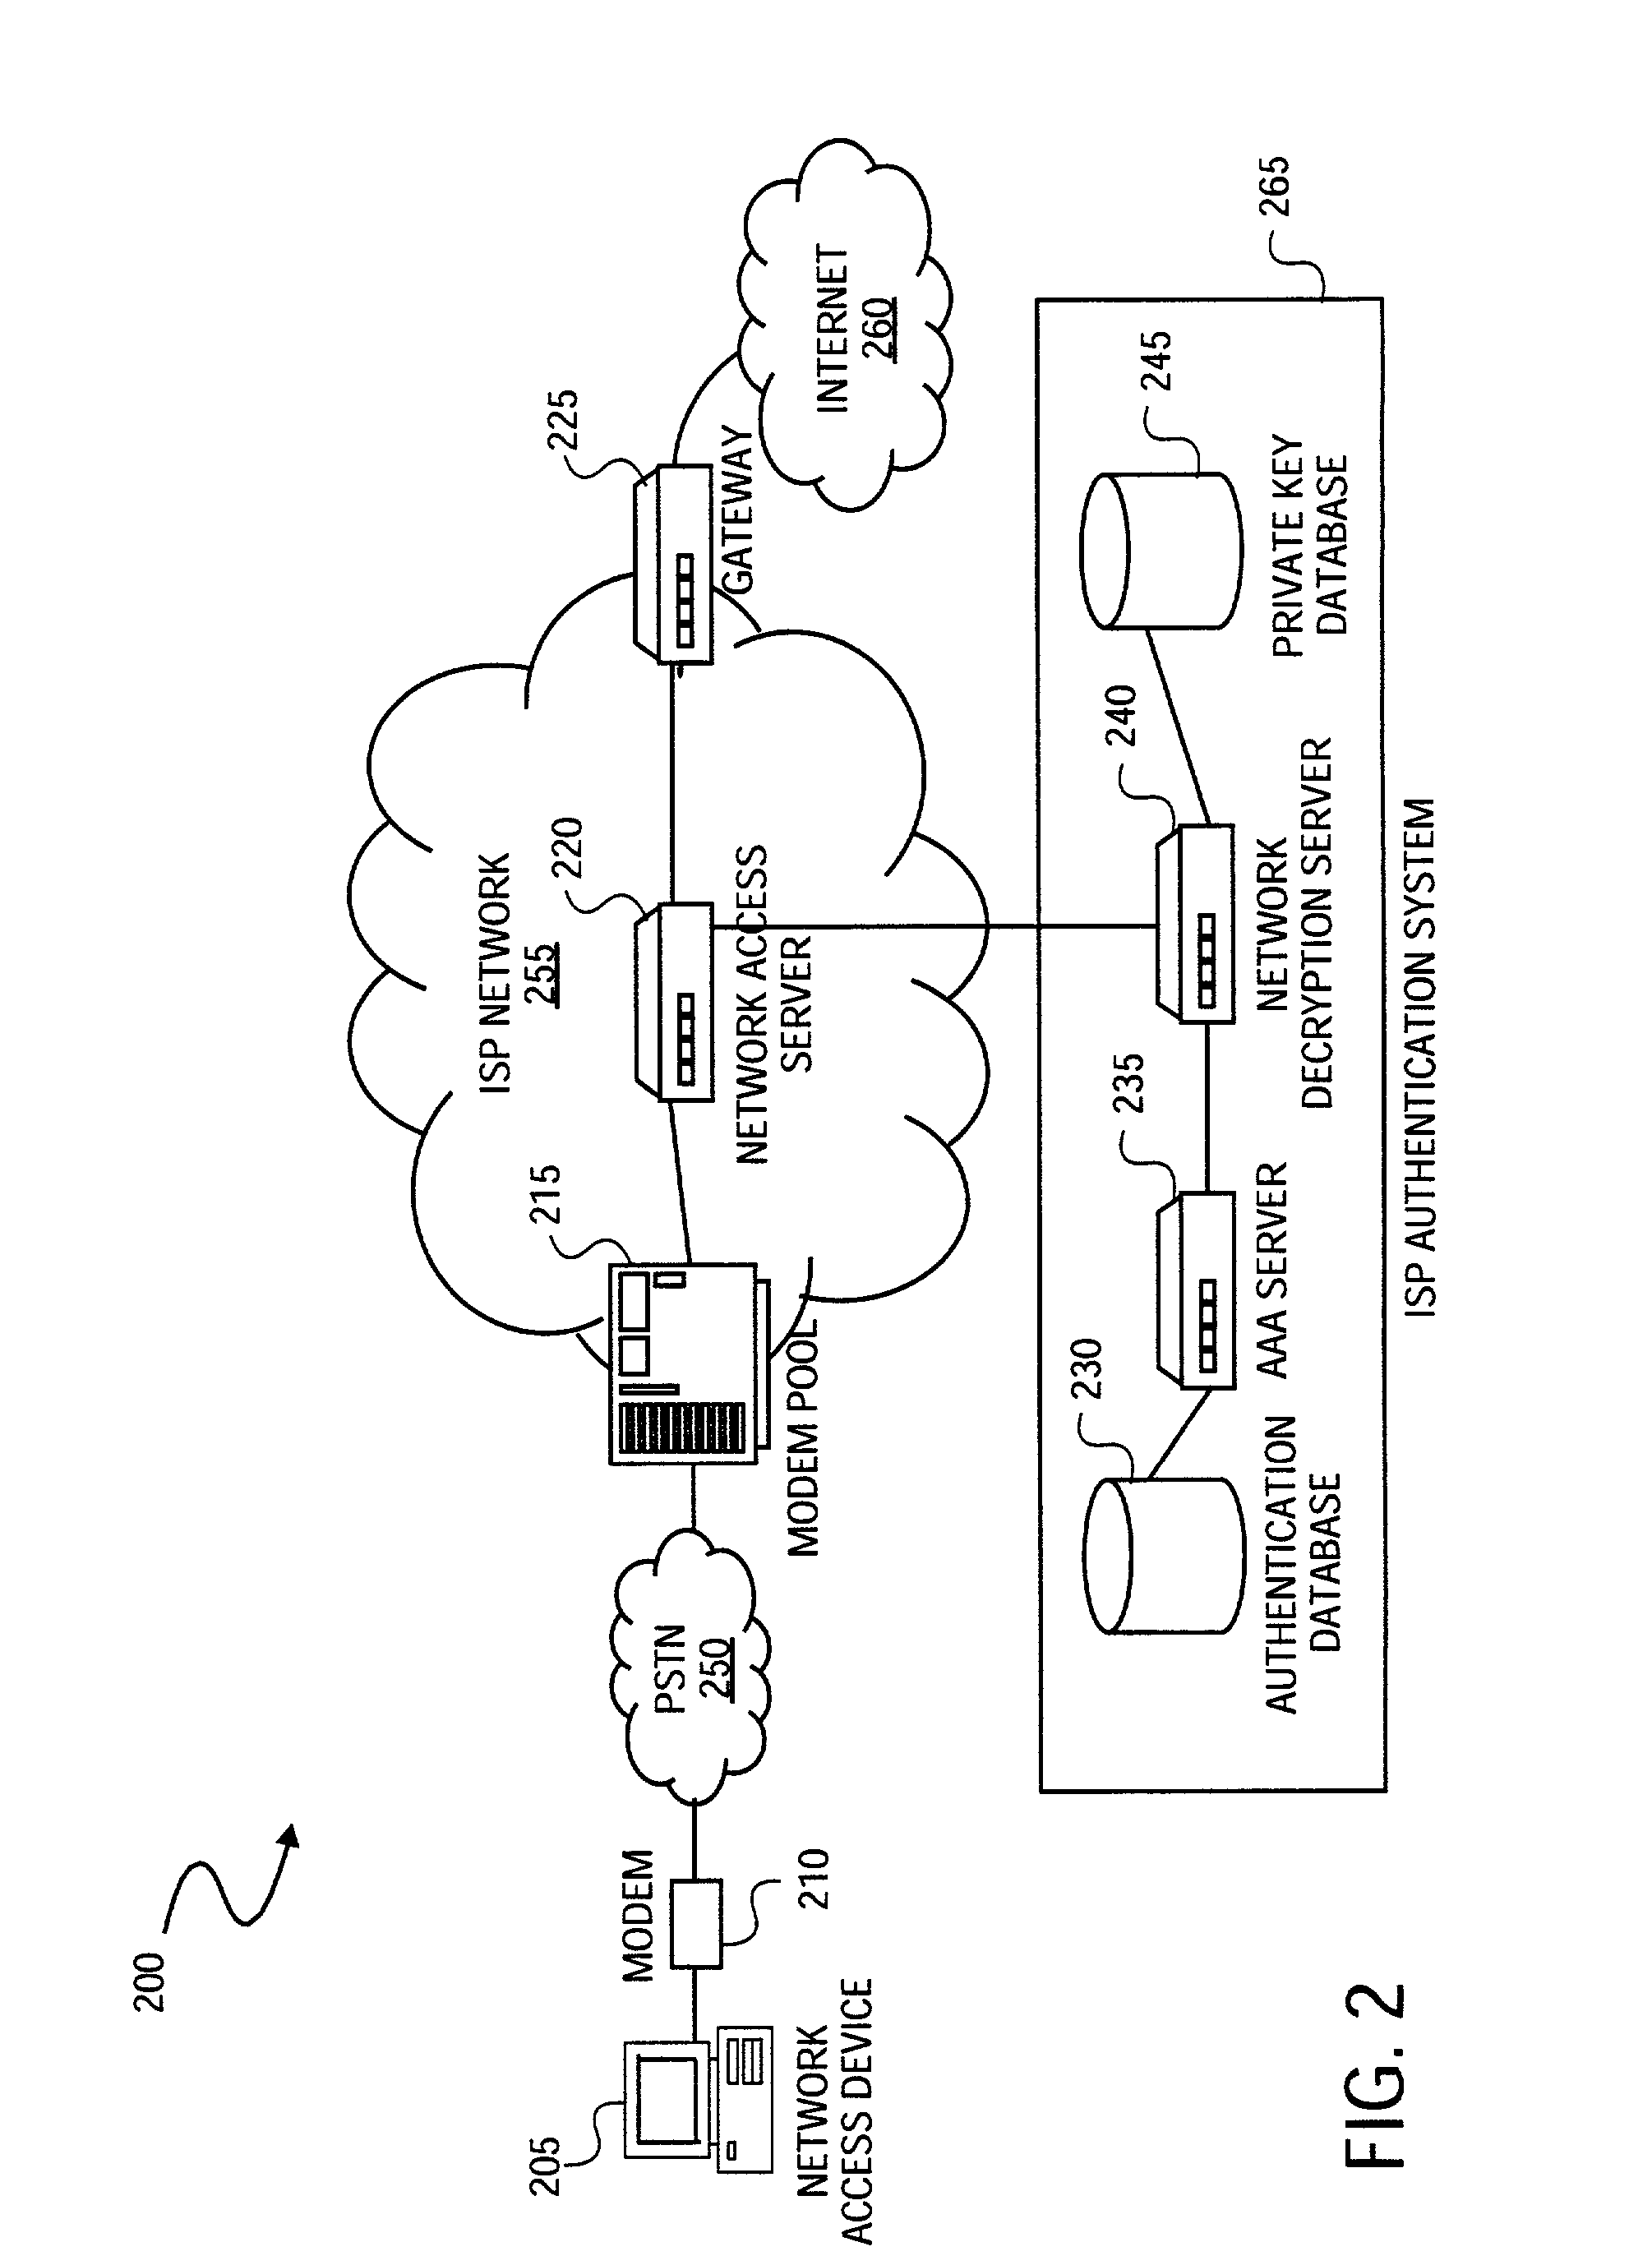 Method and system for securely authenticating network access credentials for users